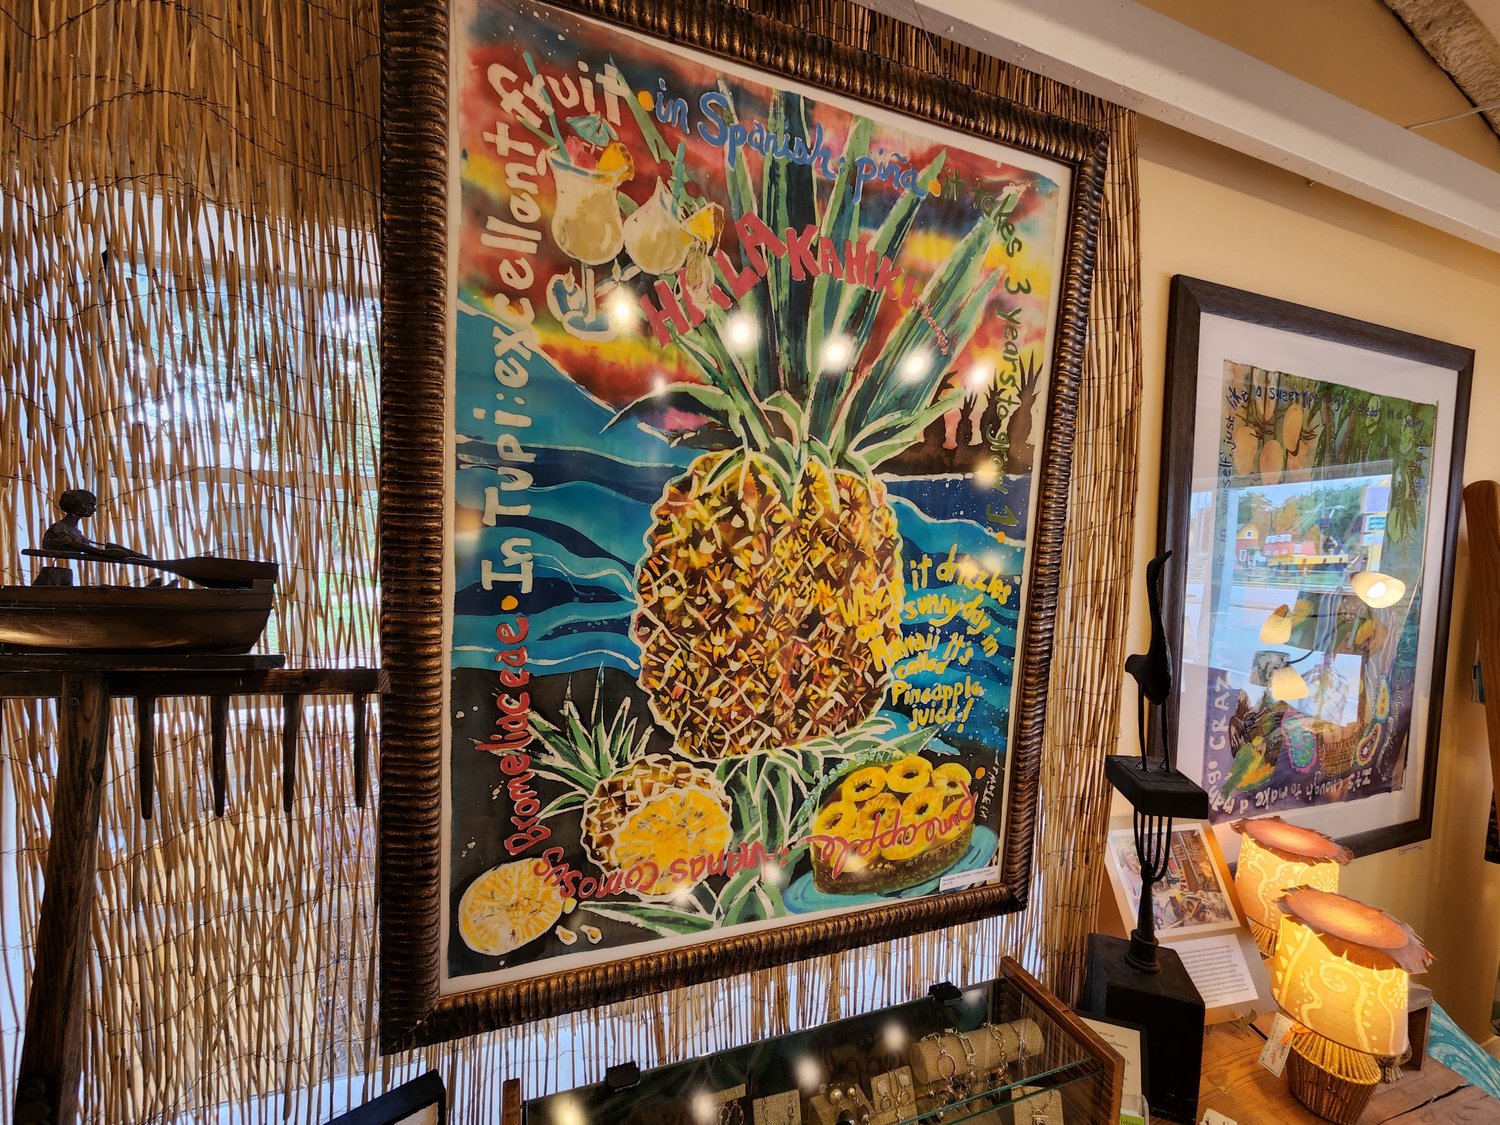 Tatter specializes in the Batik artform, which involves painting with waxes and dyes on fabric.